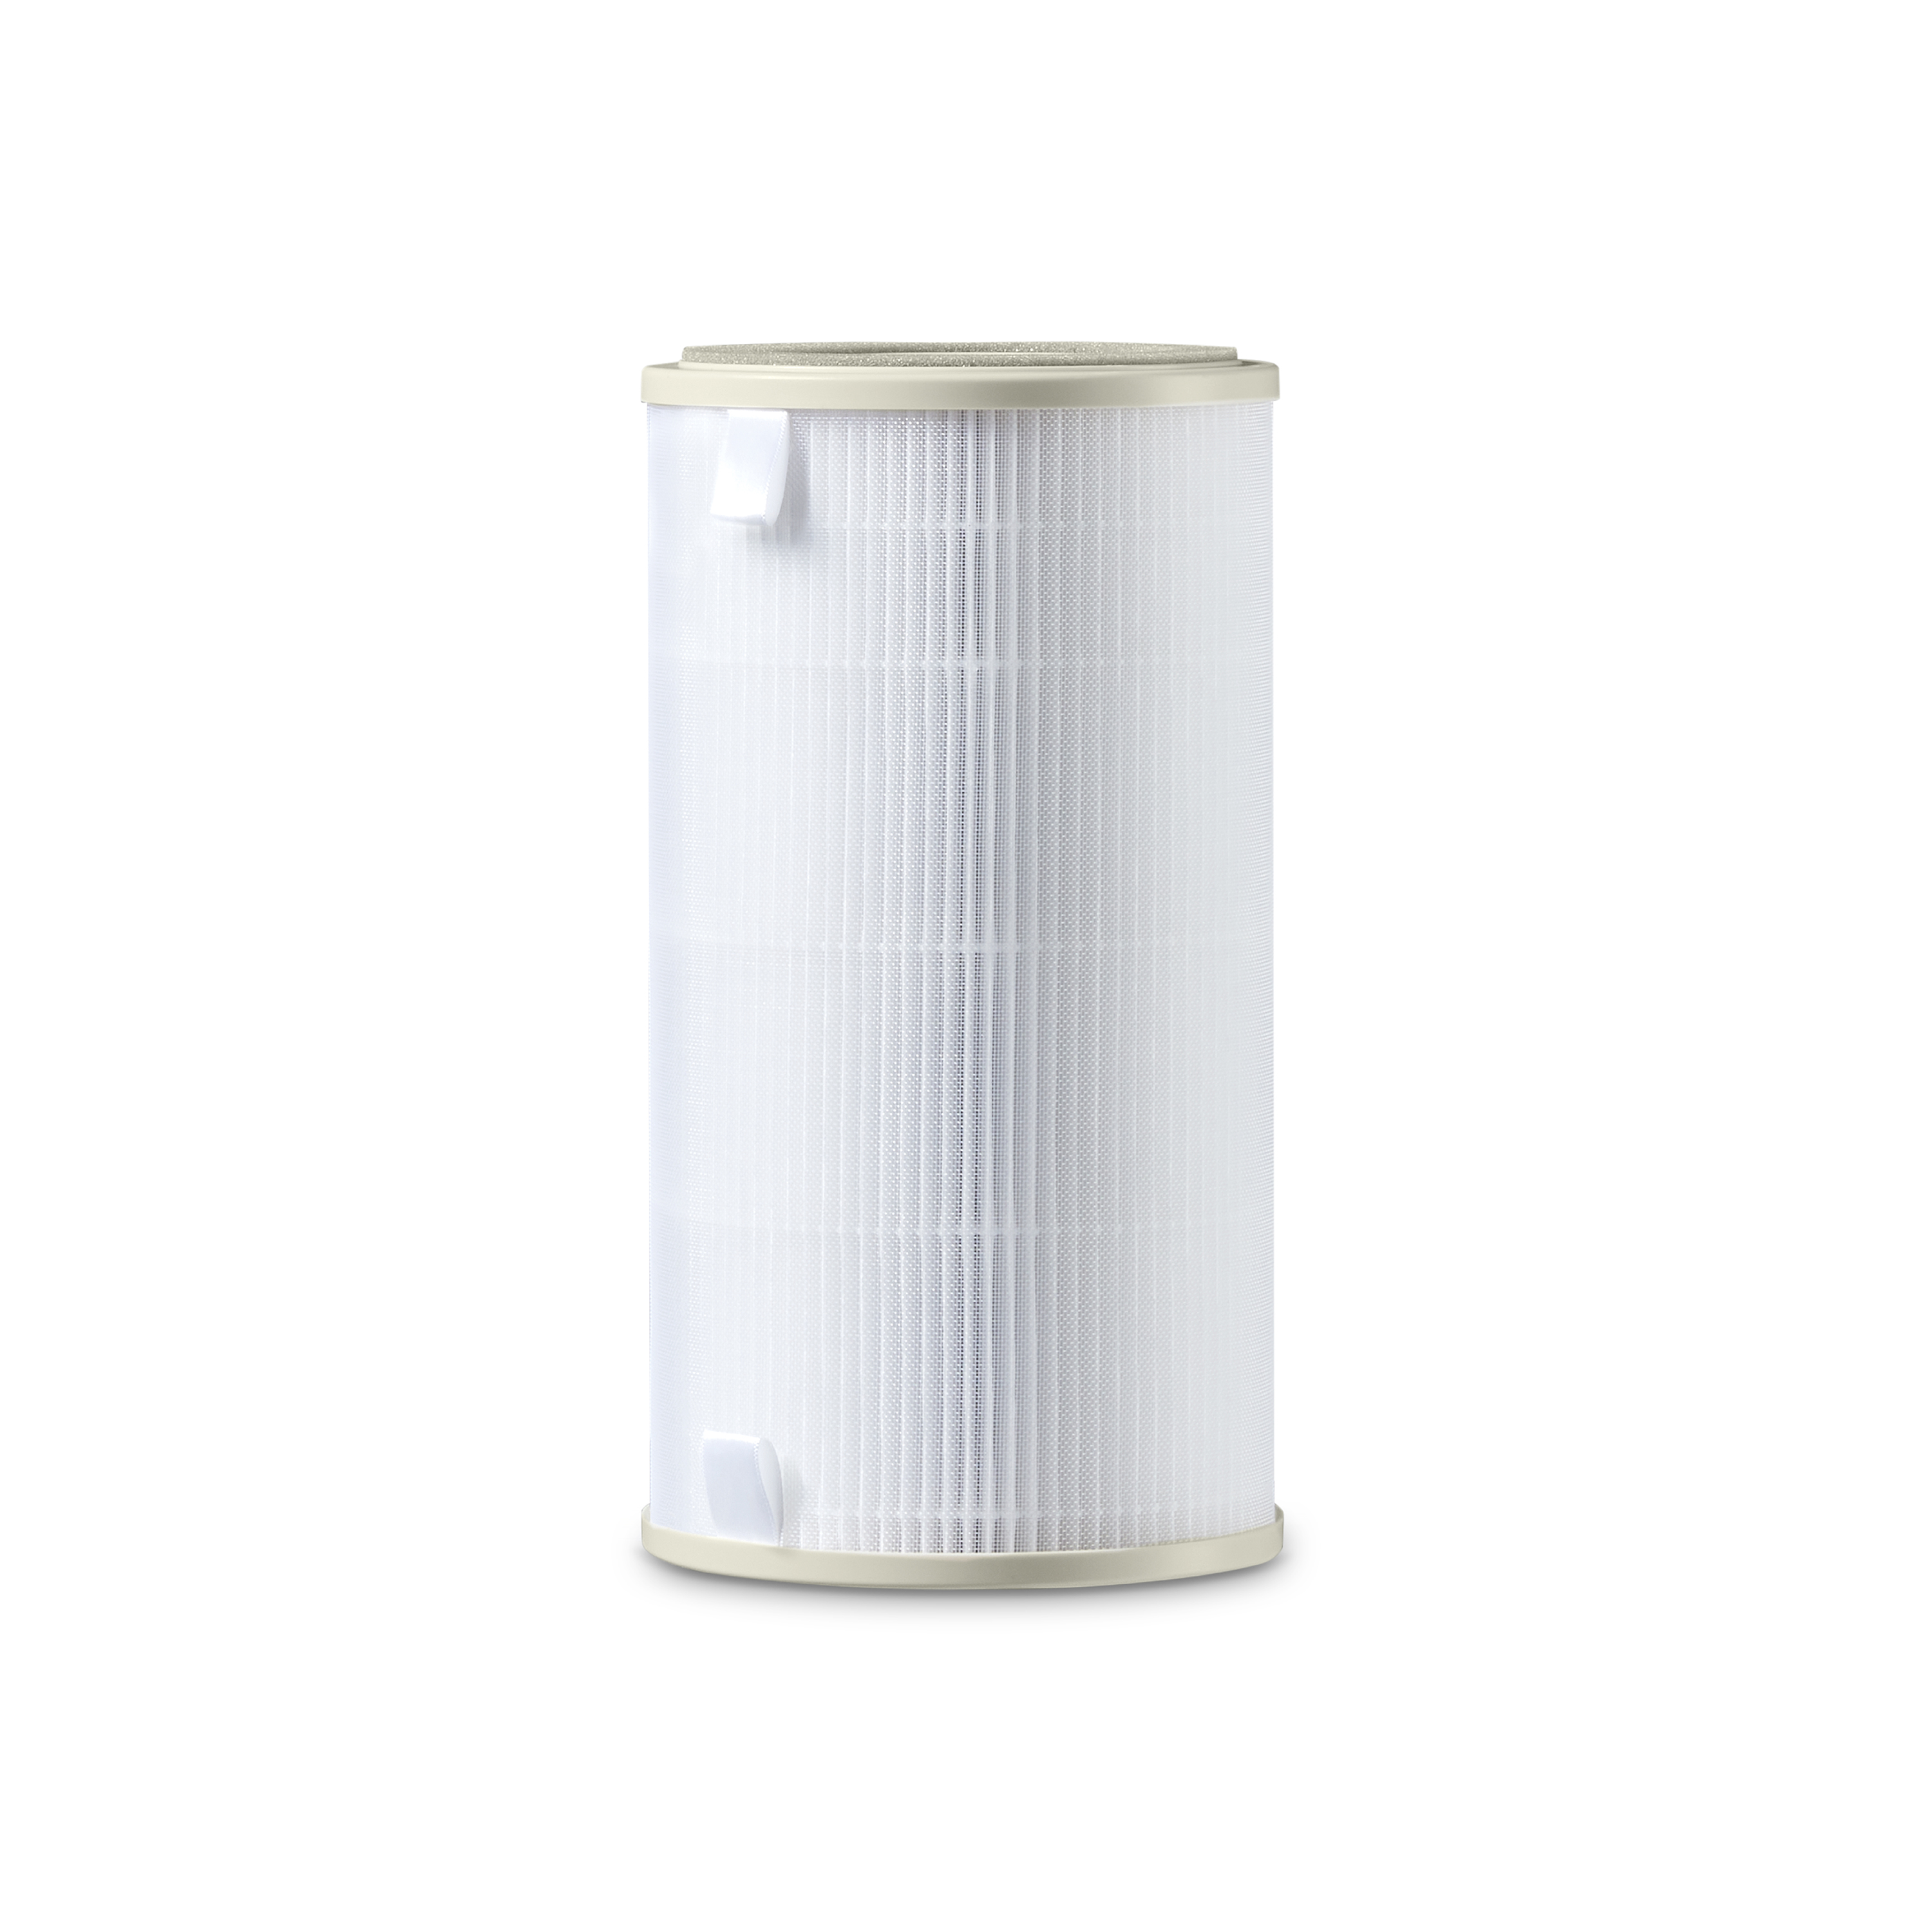 Medium Room Air Purifier Replacement Filter image number 0